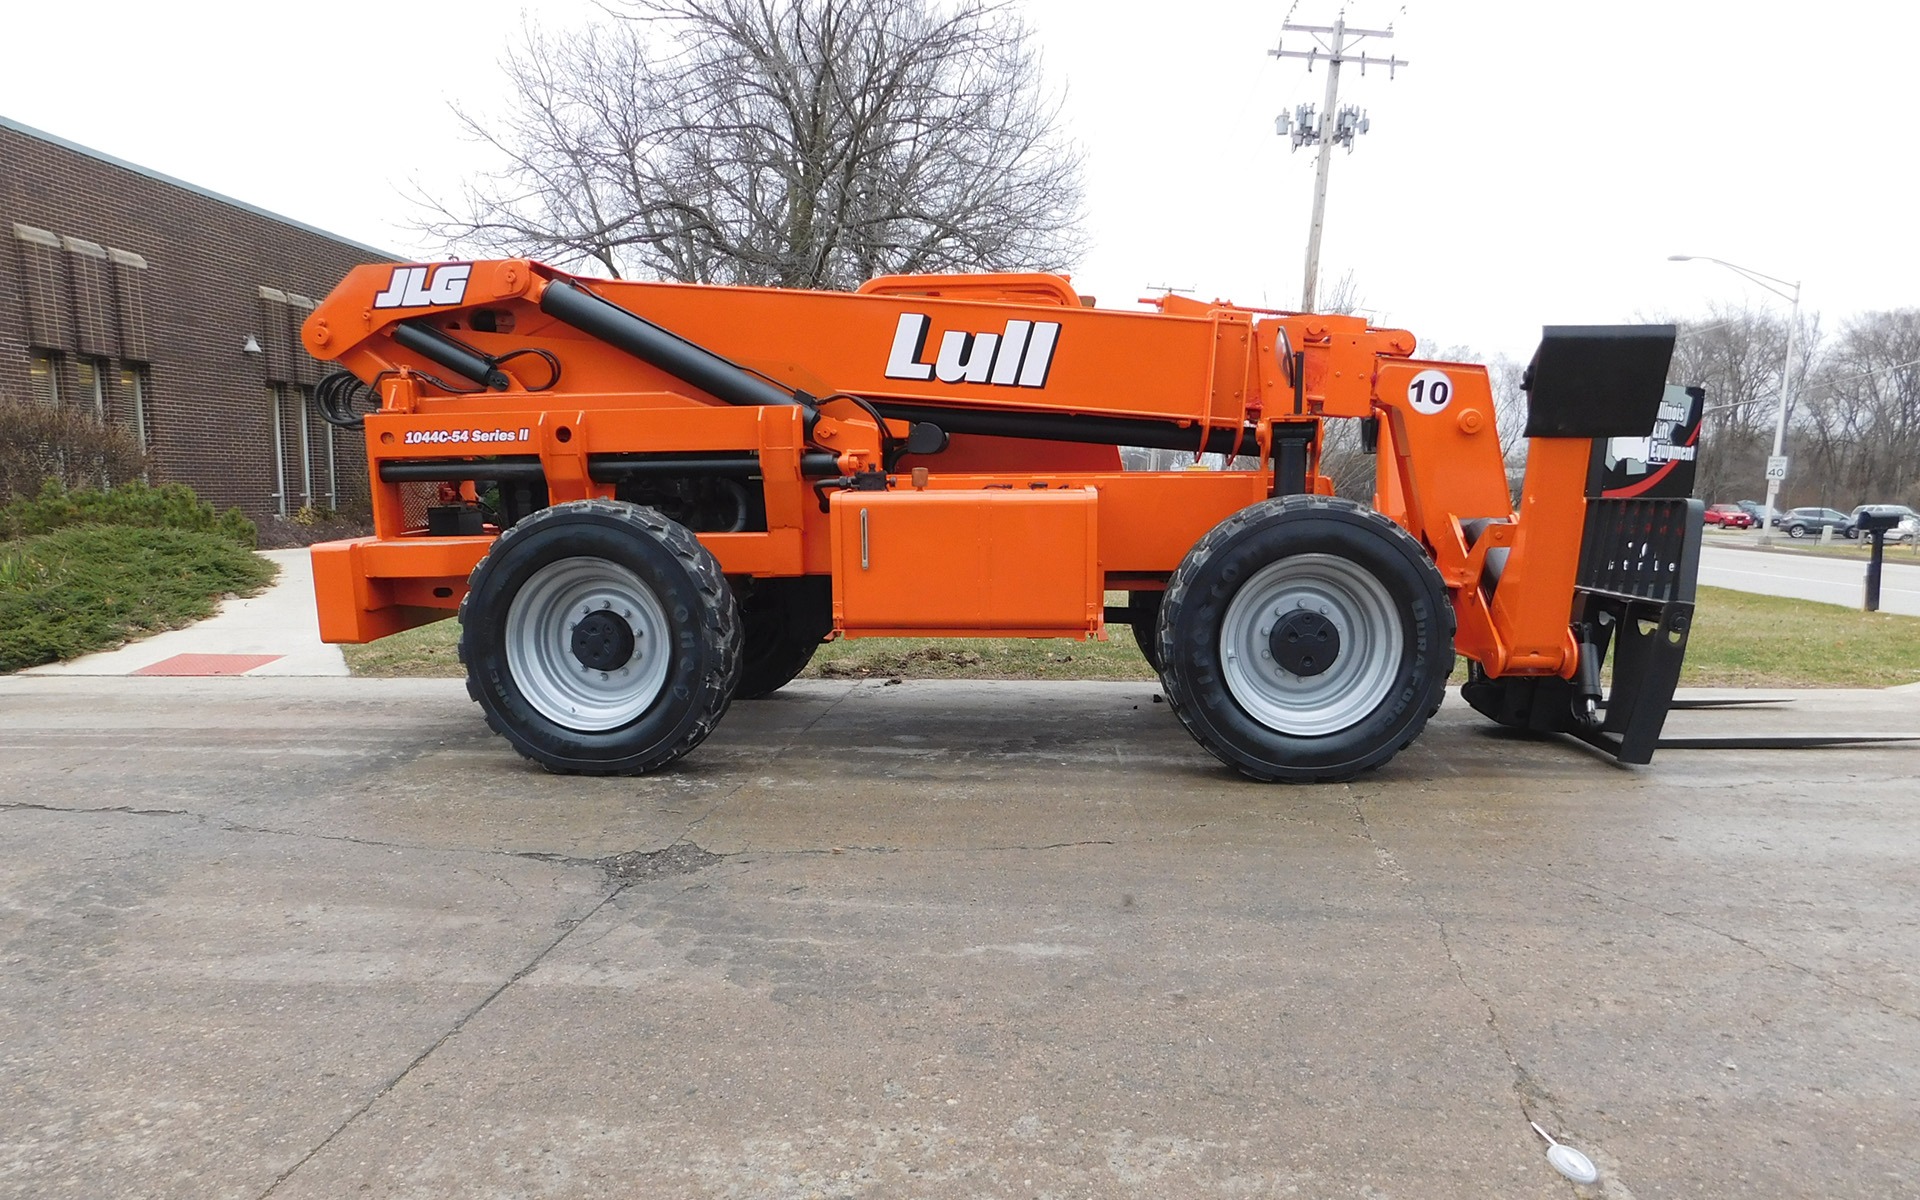 Used 2006 LULL 1044C-54  | Cary, IL